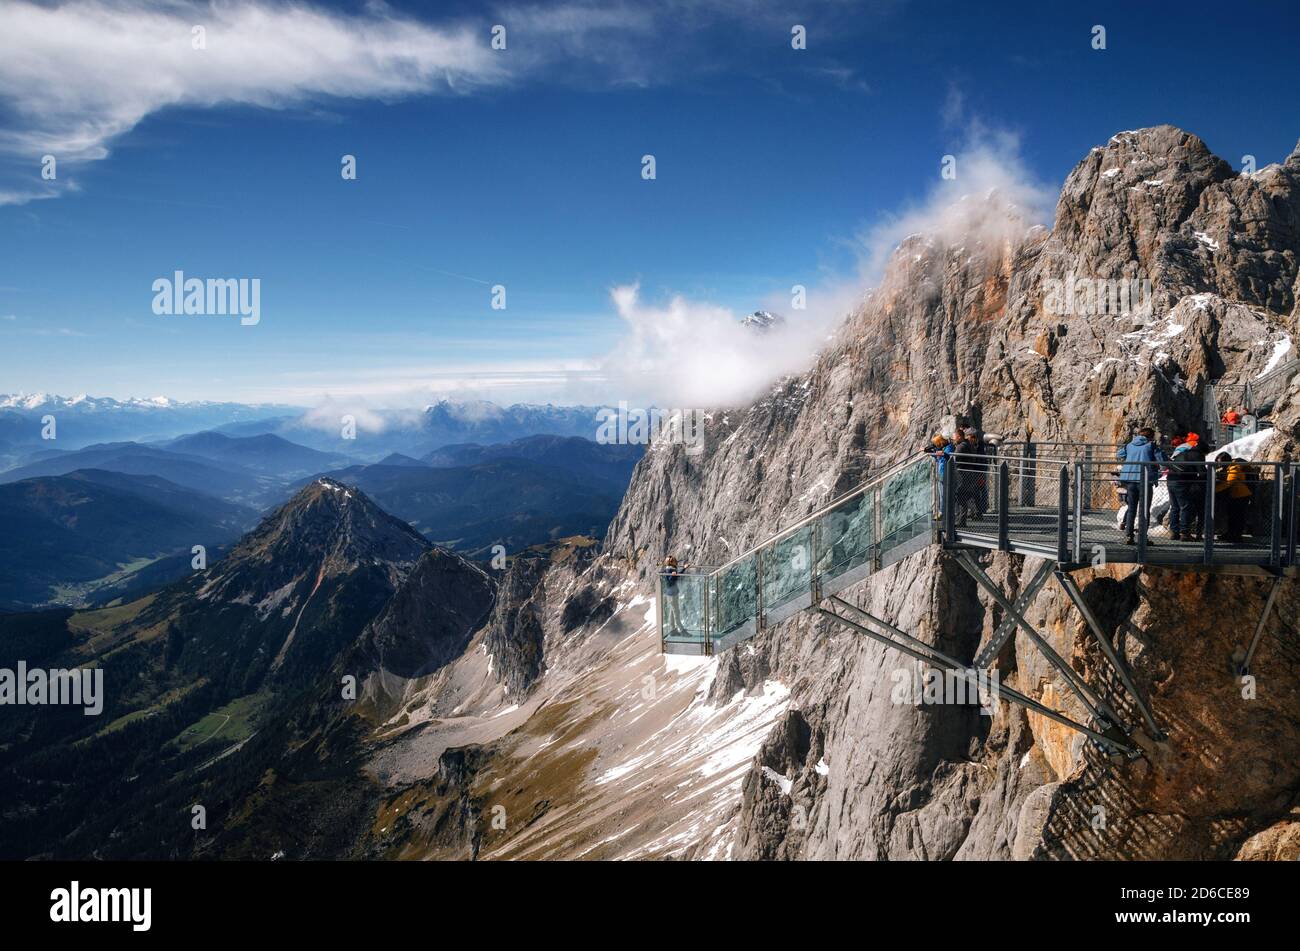 Tourists stand on observation deck of skywalk rope bridge Dachstein Mountains and enjoys the landscape in Austria Stock Photo